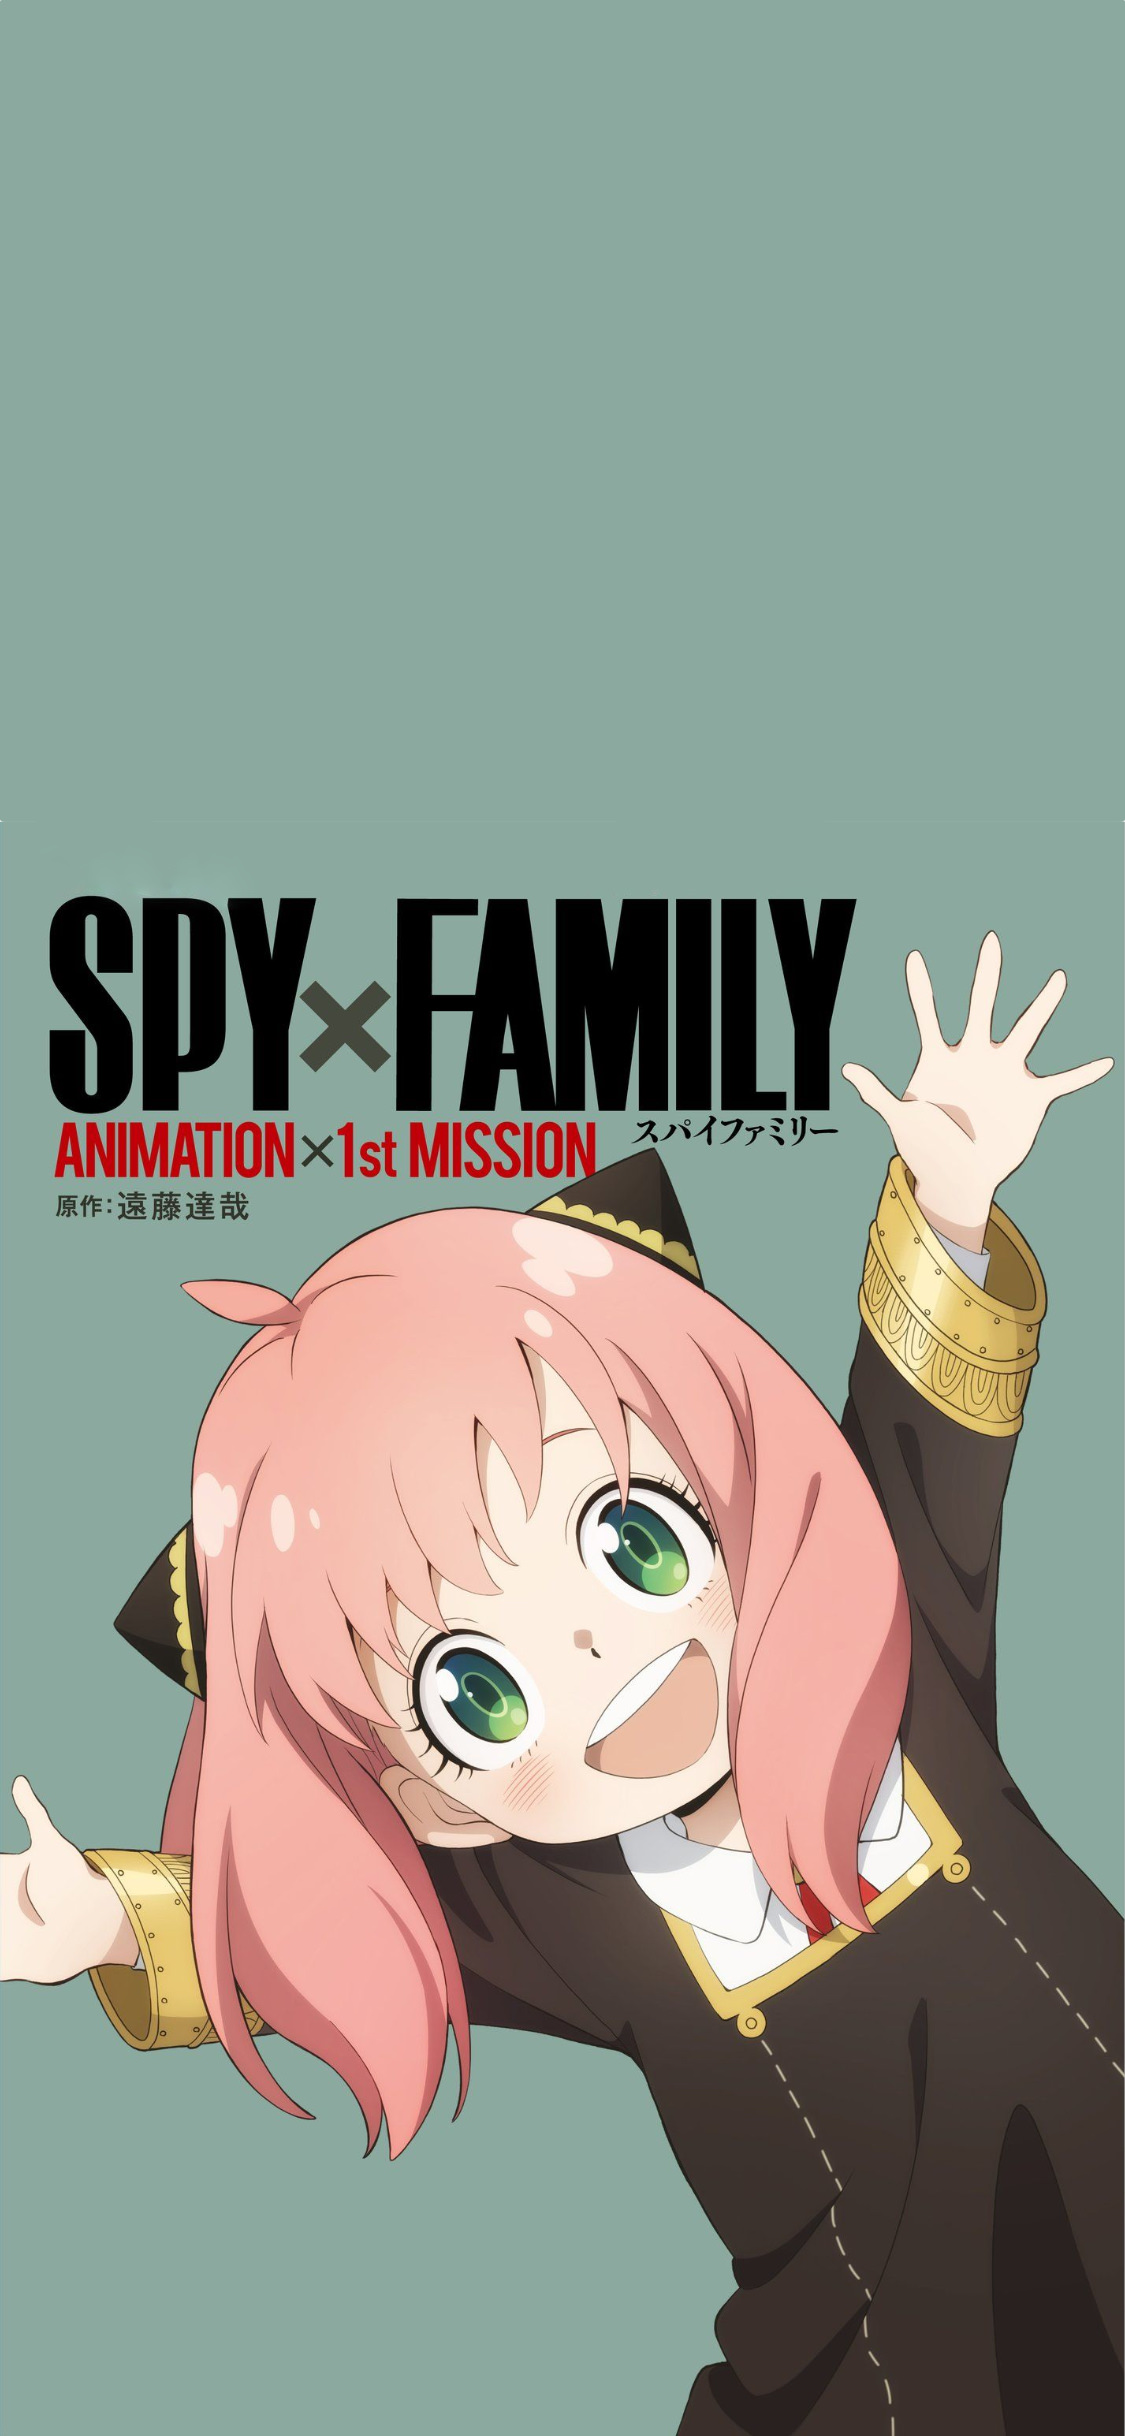 spyfamily37 - SPY×FAMILYの無料高画質スマホ壁紙44枚 [iPhone＆Androidに対応]